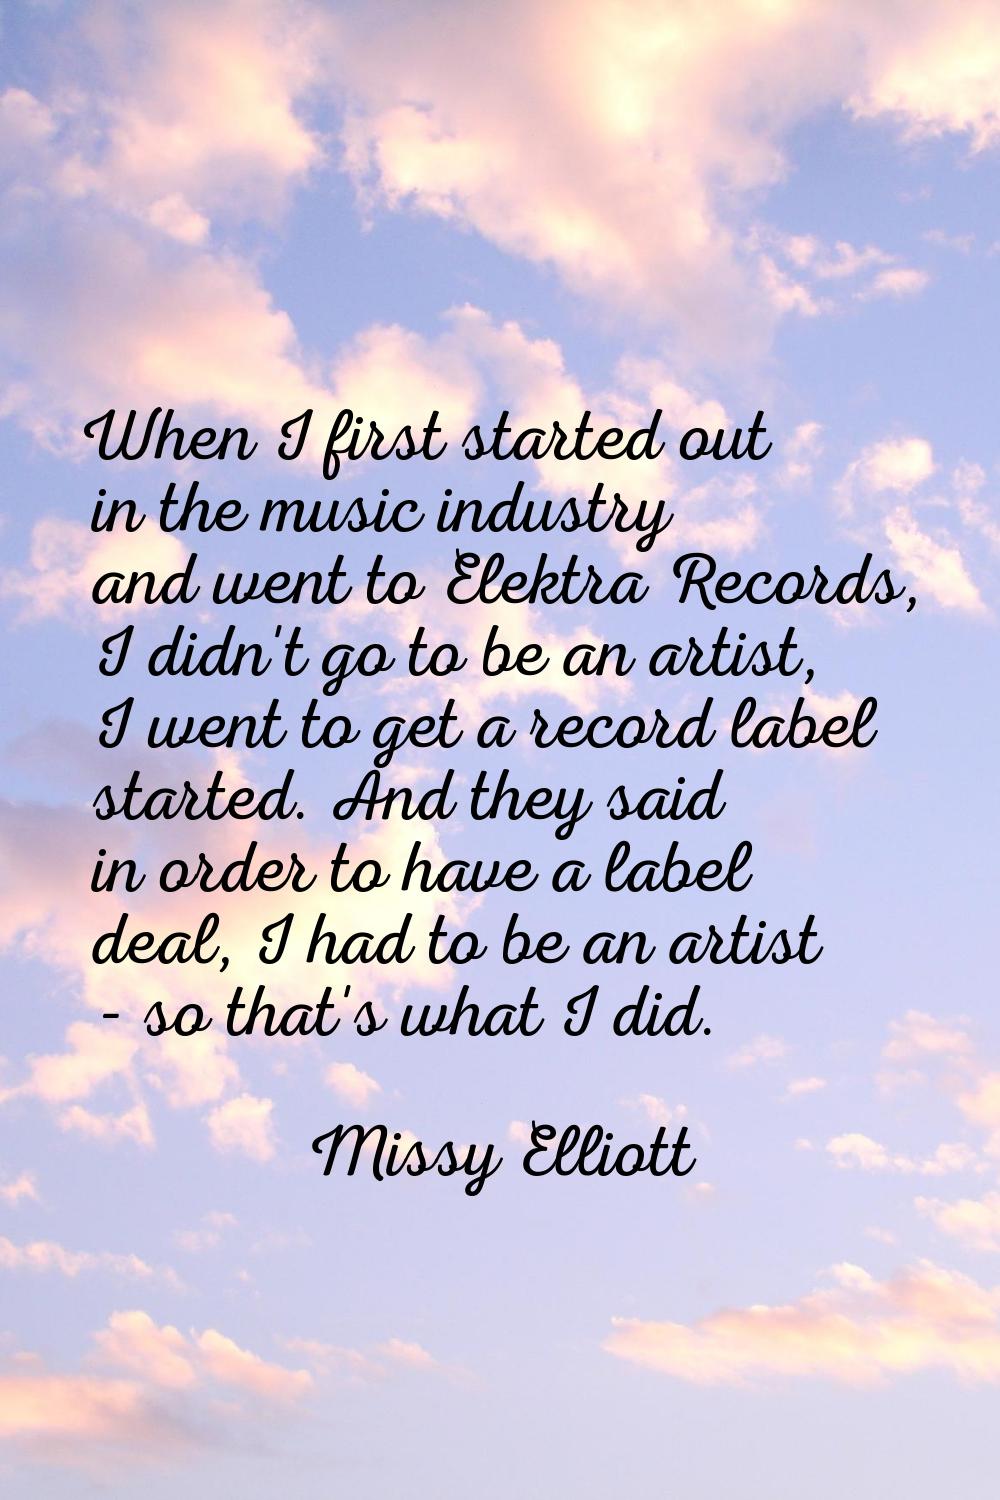 When I first started out in the music industry and went to Elektra Records, I didn't go to be an ar